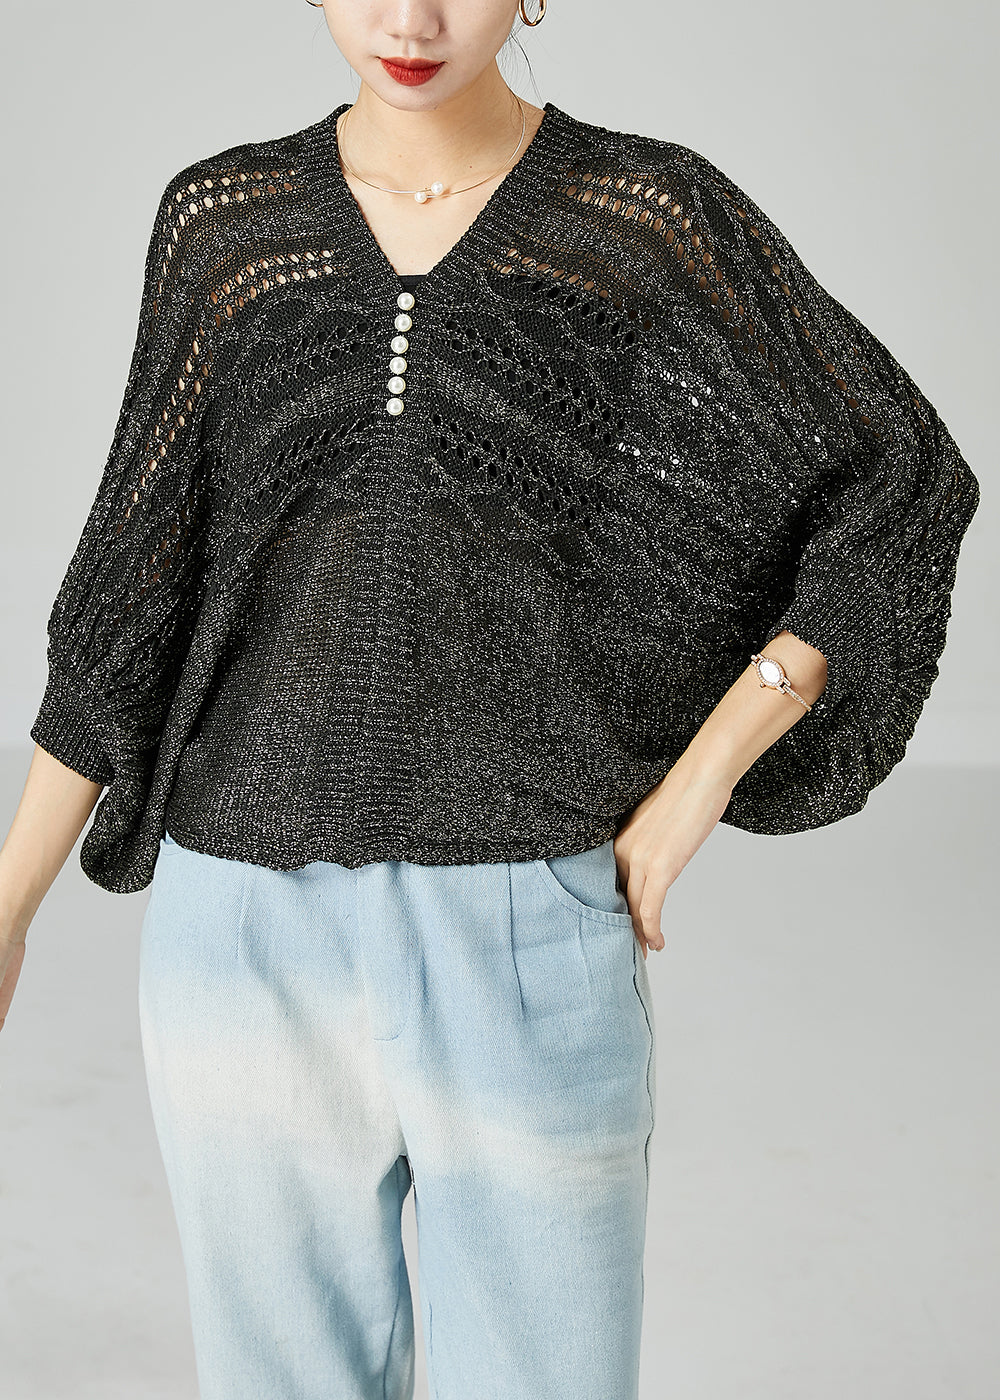 Modern Grey Oversized Hollow Out Knit Tops Batwing Sleeve